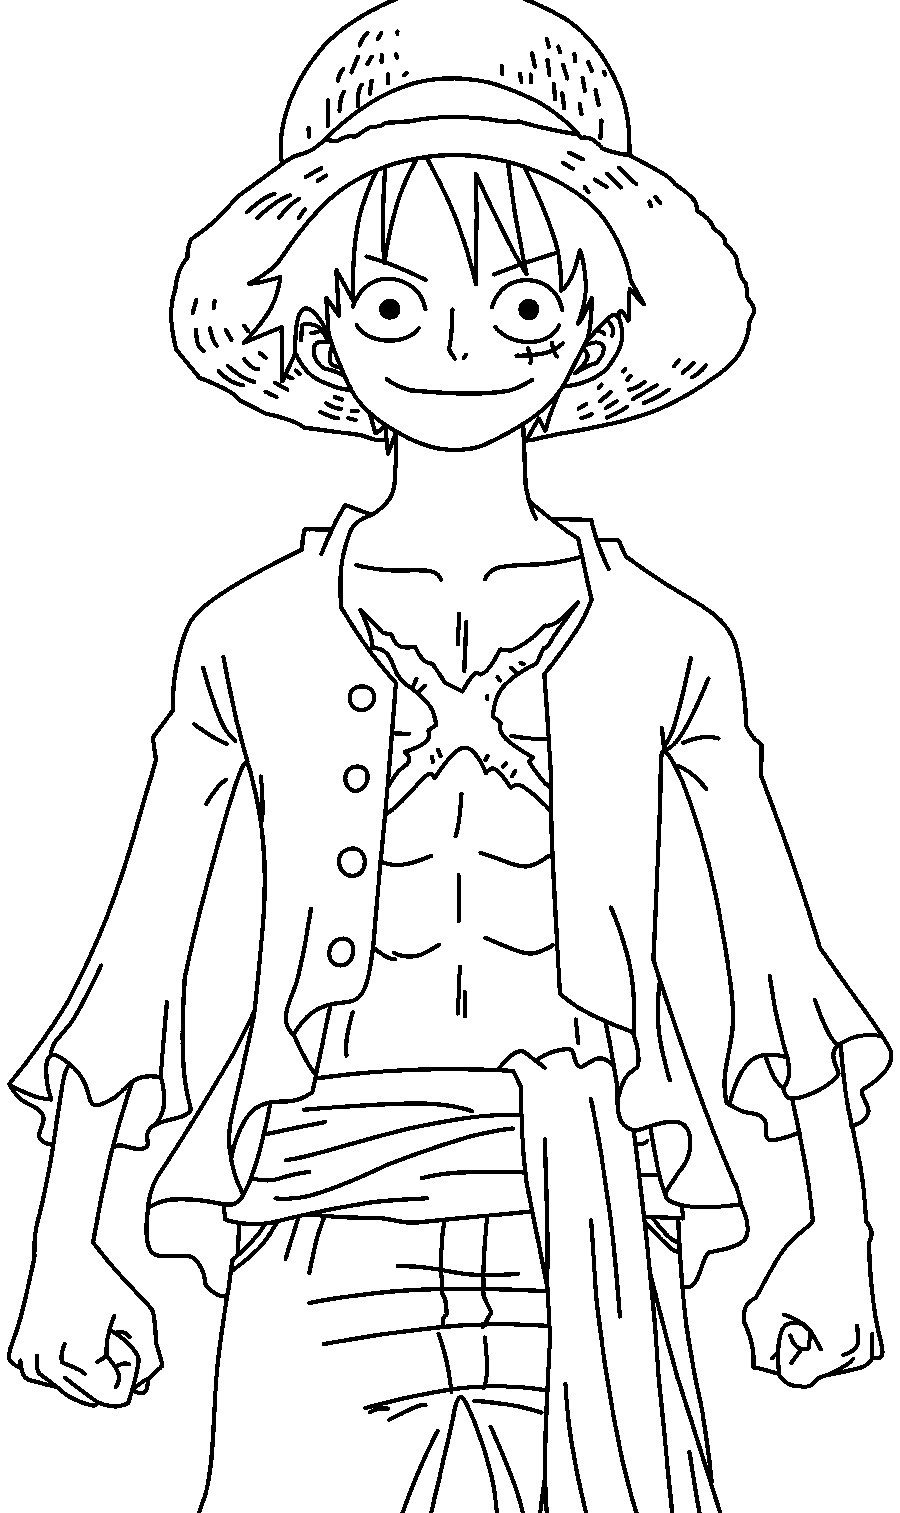 Luffy One piece Coloring Page